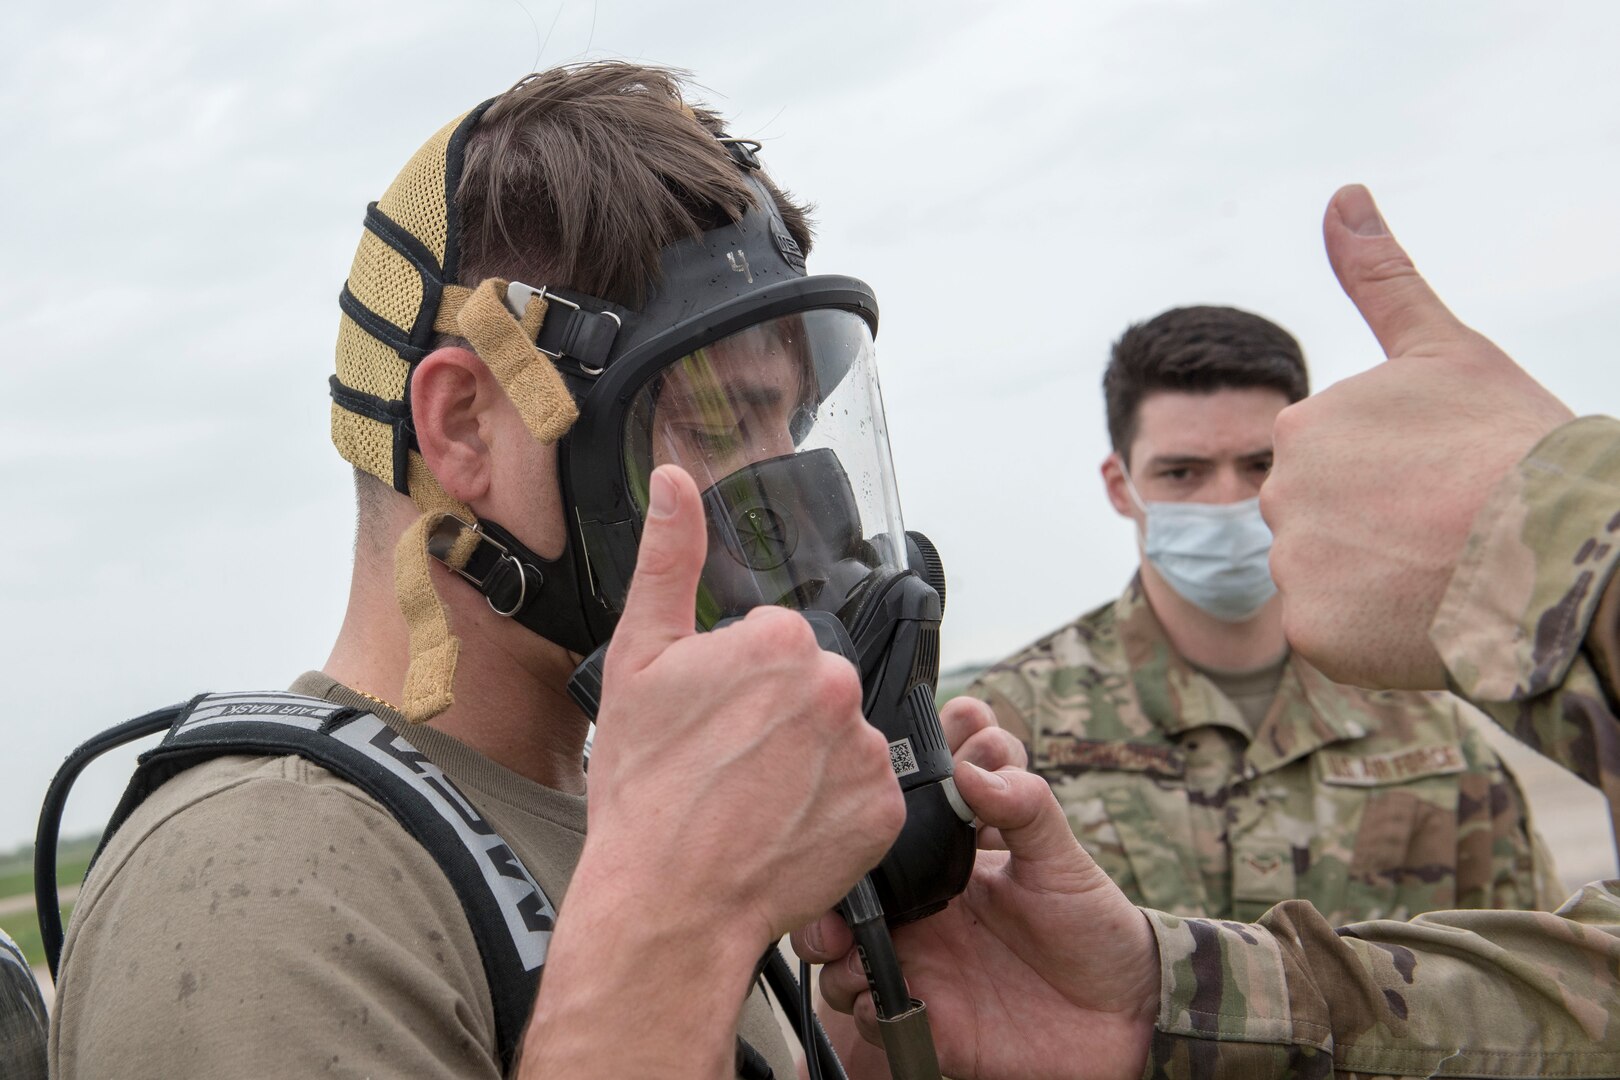 U.S. Air Force 1st Lt Samuel Gerard, 167th bioenvironmental engineering, gives a thumbs-up indicating his mask is secure and operational during a during a Counter CBRN (Chemical, Biological, Radiological, and Nuclear) All-Hazard Management Response, or CAMR, exercise at the 167th Airlift Wing, Shepherd Field,, Martinsburg, West Virginia, April 30, 2021. CAMR is a hybrid program of classroom lecture, discussion and tabletop exercises that culminate in a full scale emergency response exercise.